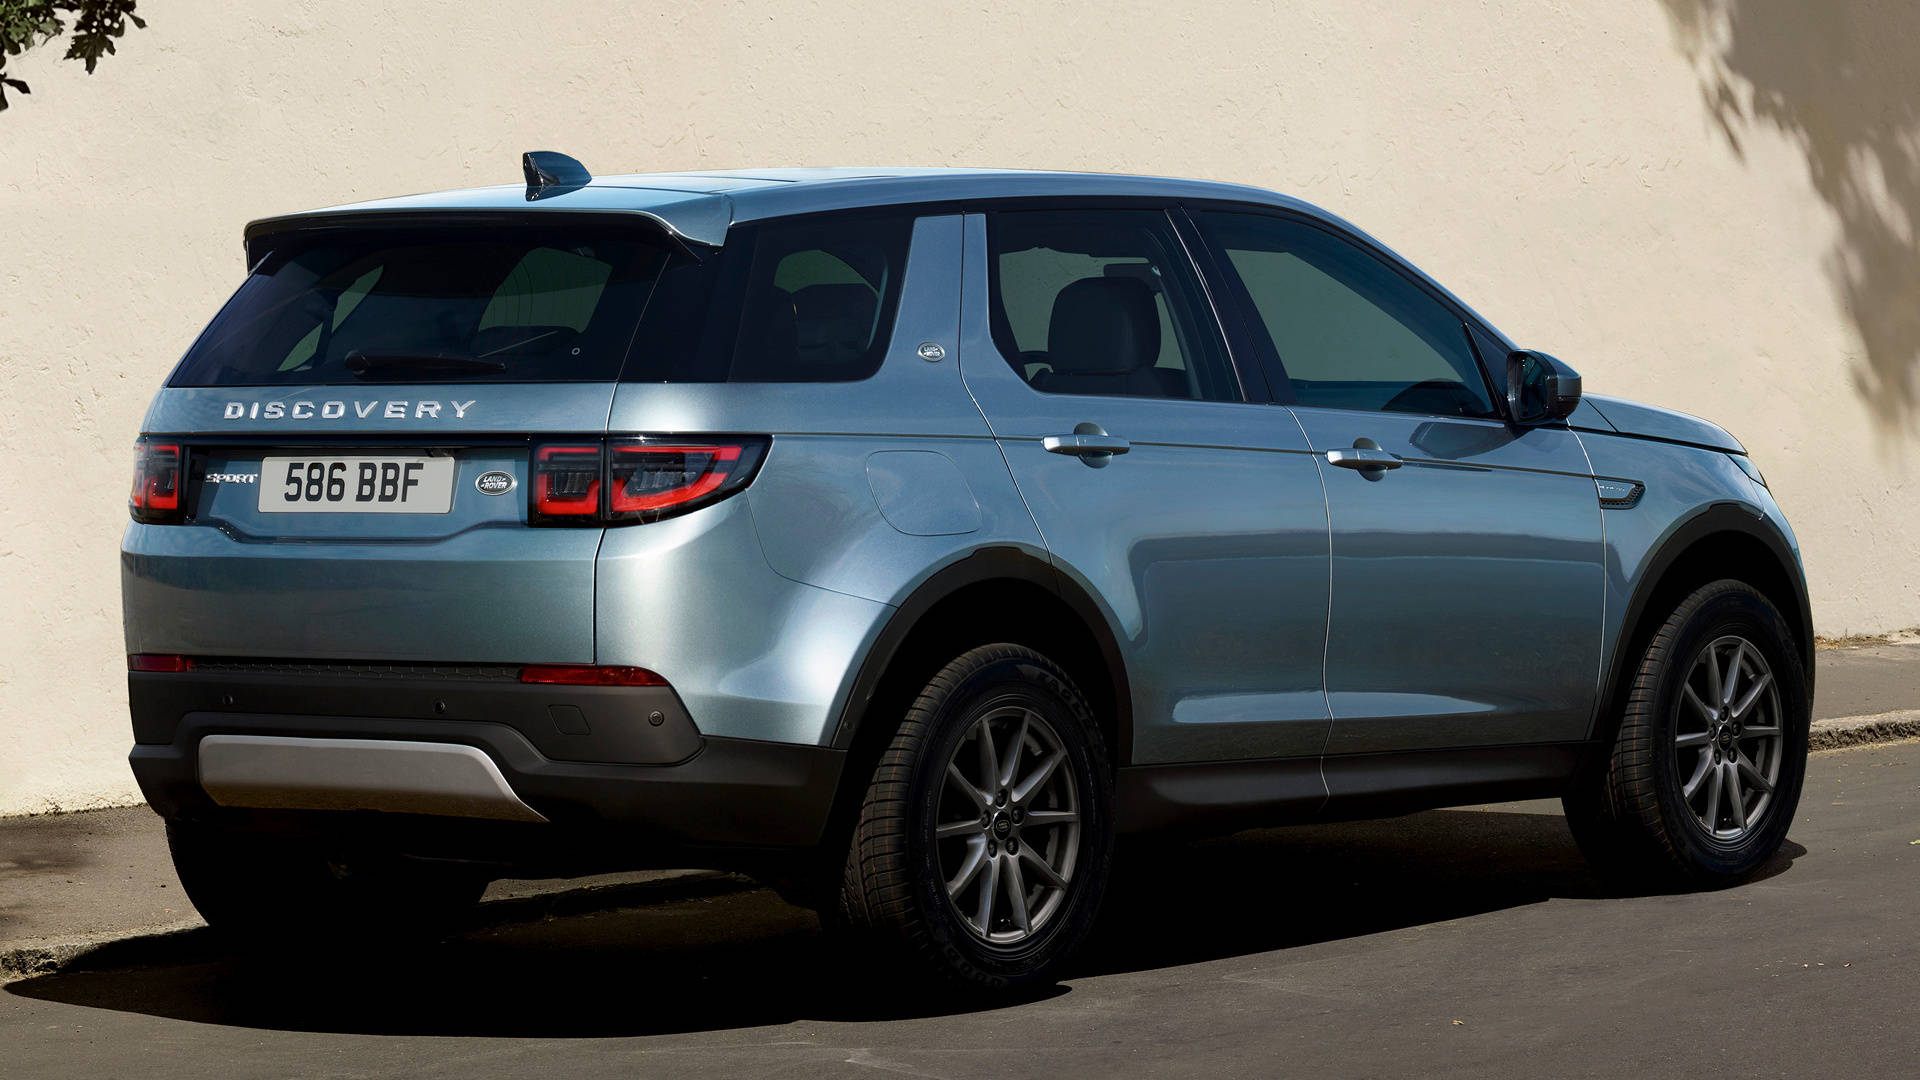 2020 Discovery Land Rover Iphone